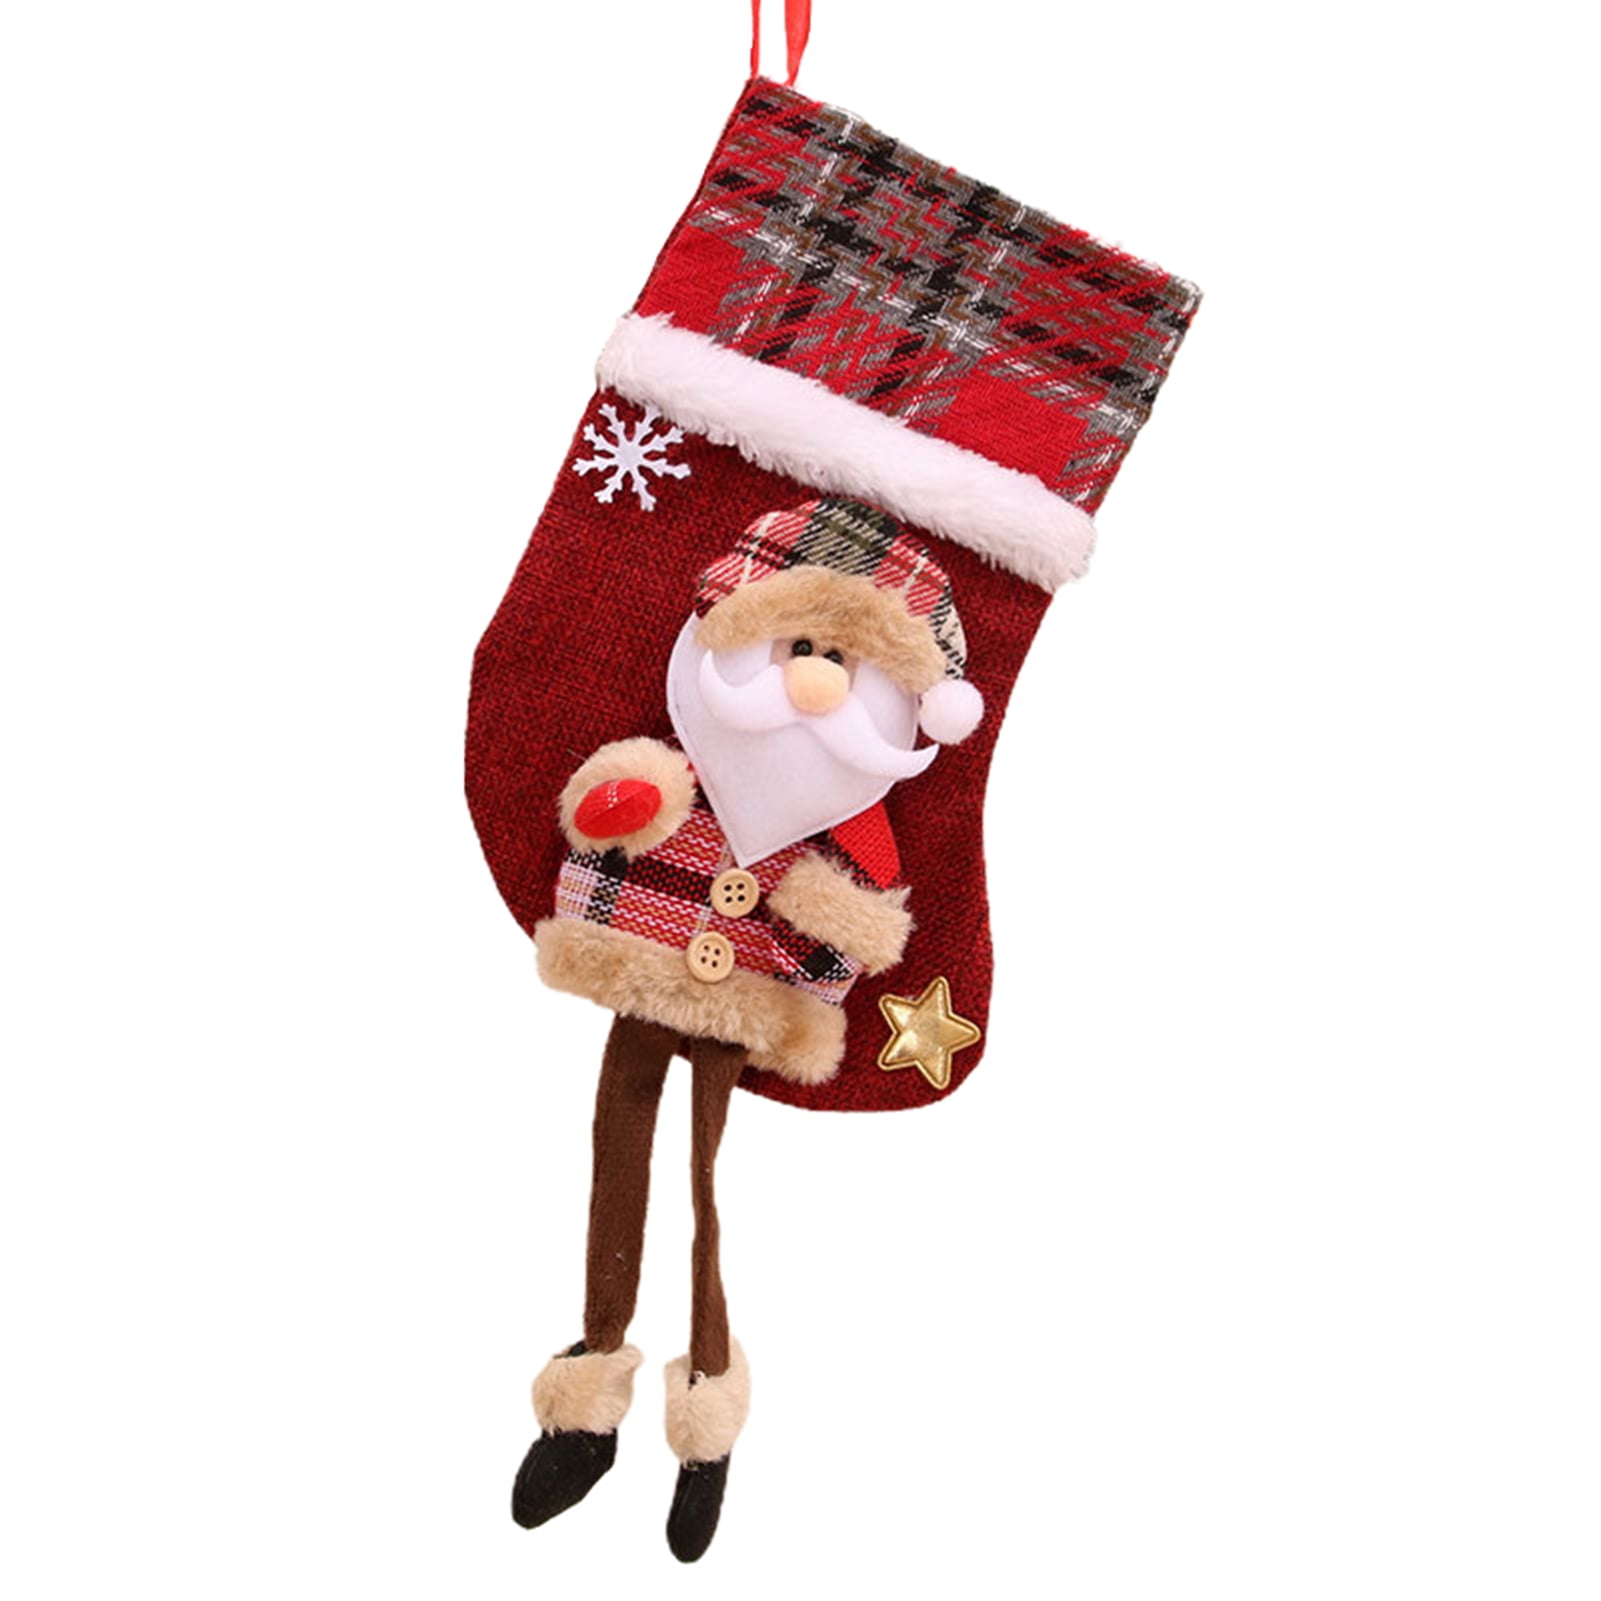 Flannelette Christmas Stockings with DIY Point Drill Christmas Snowman  Stockings Decorative Santa Claus Stockings Cute for Gift